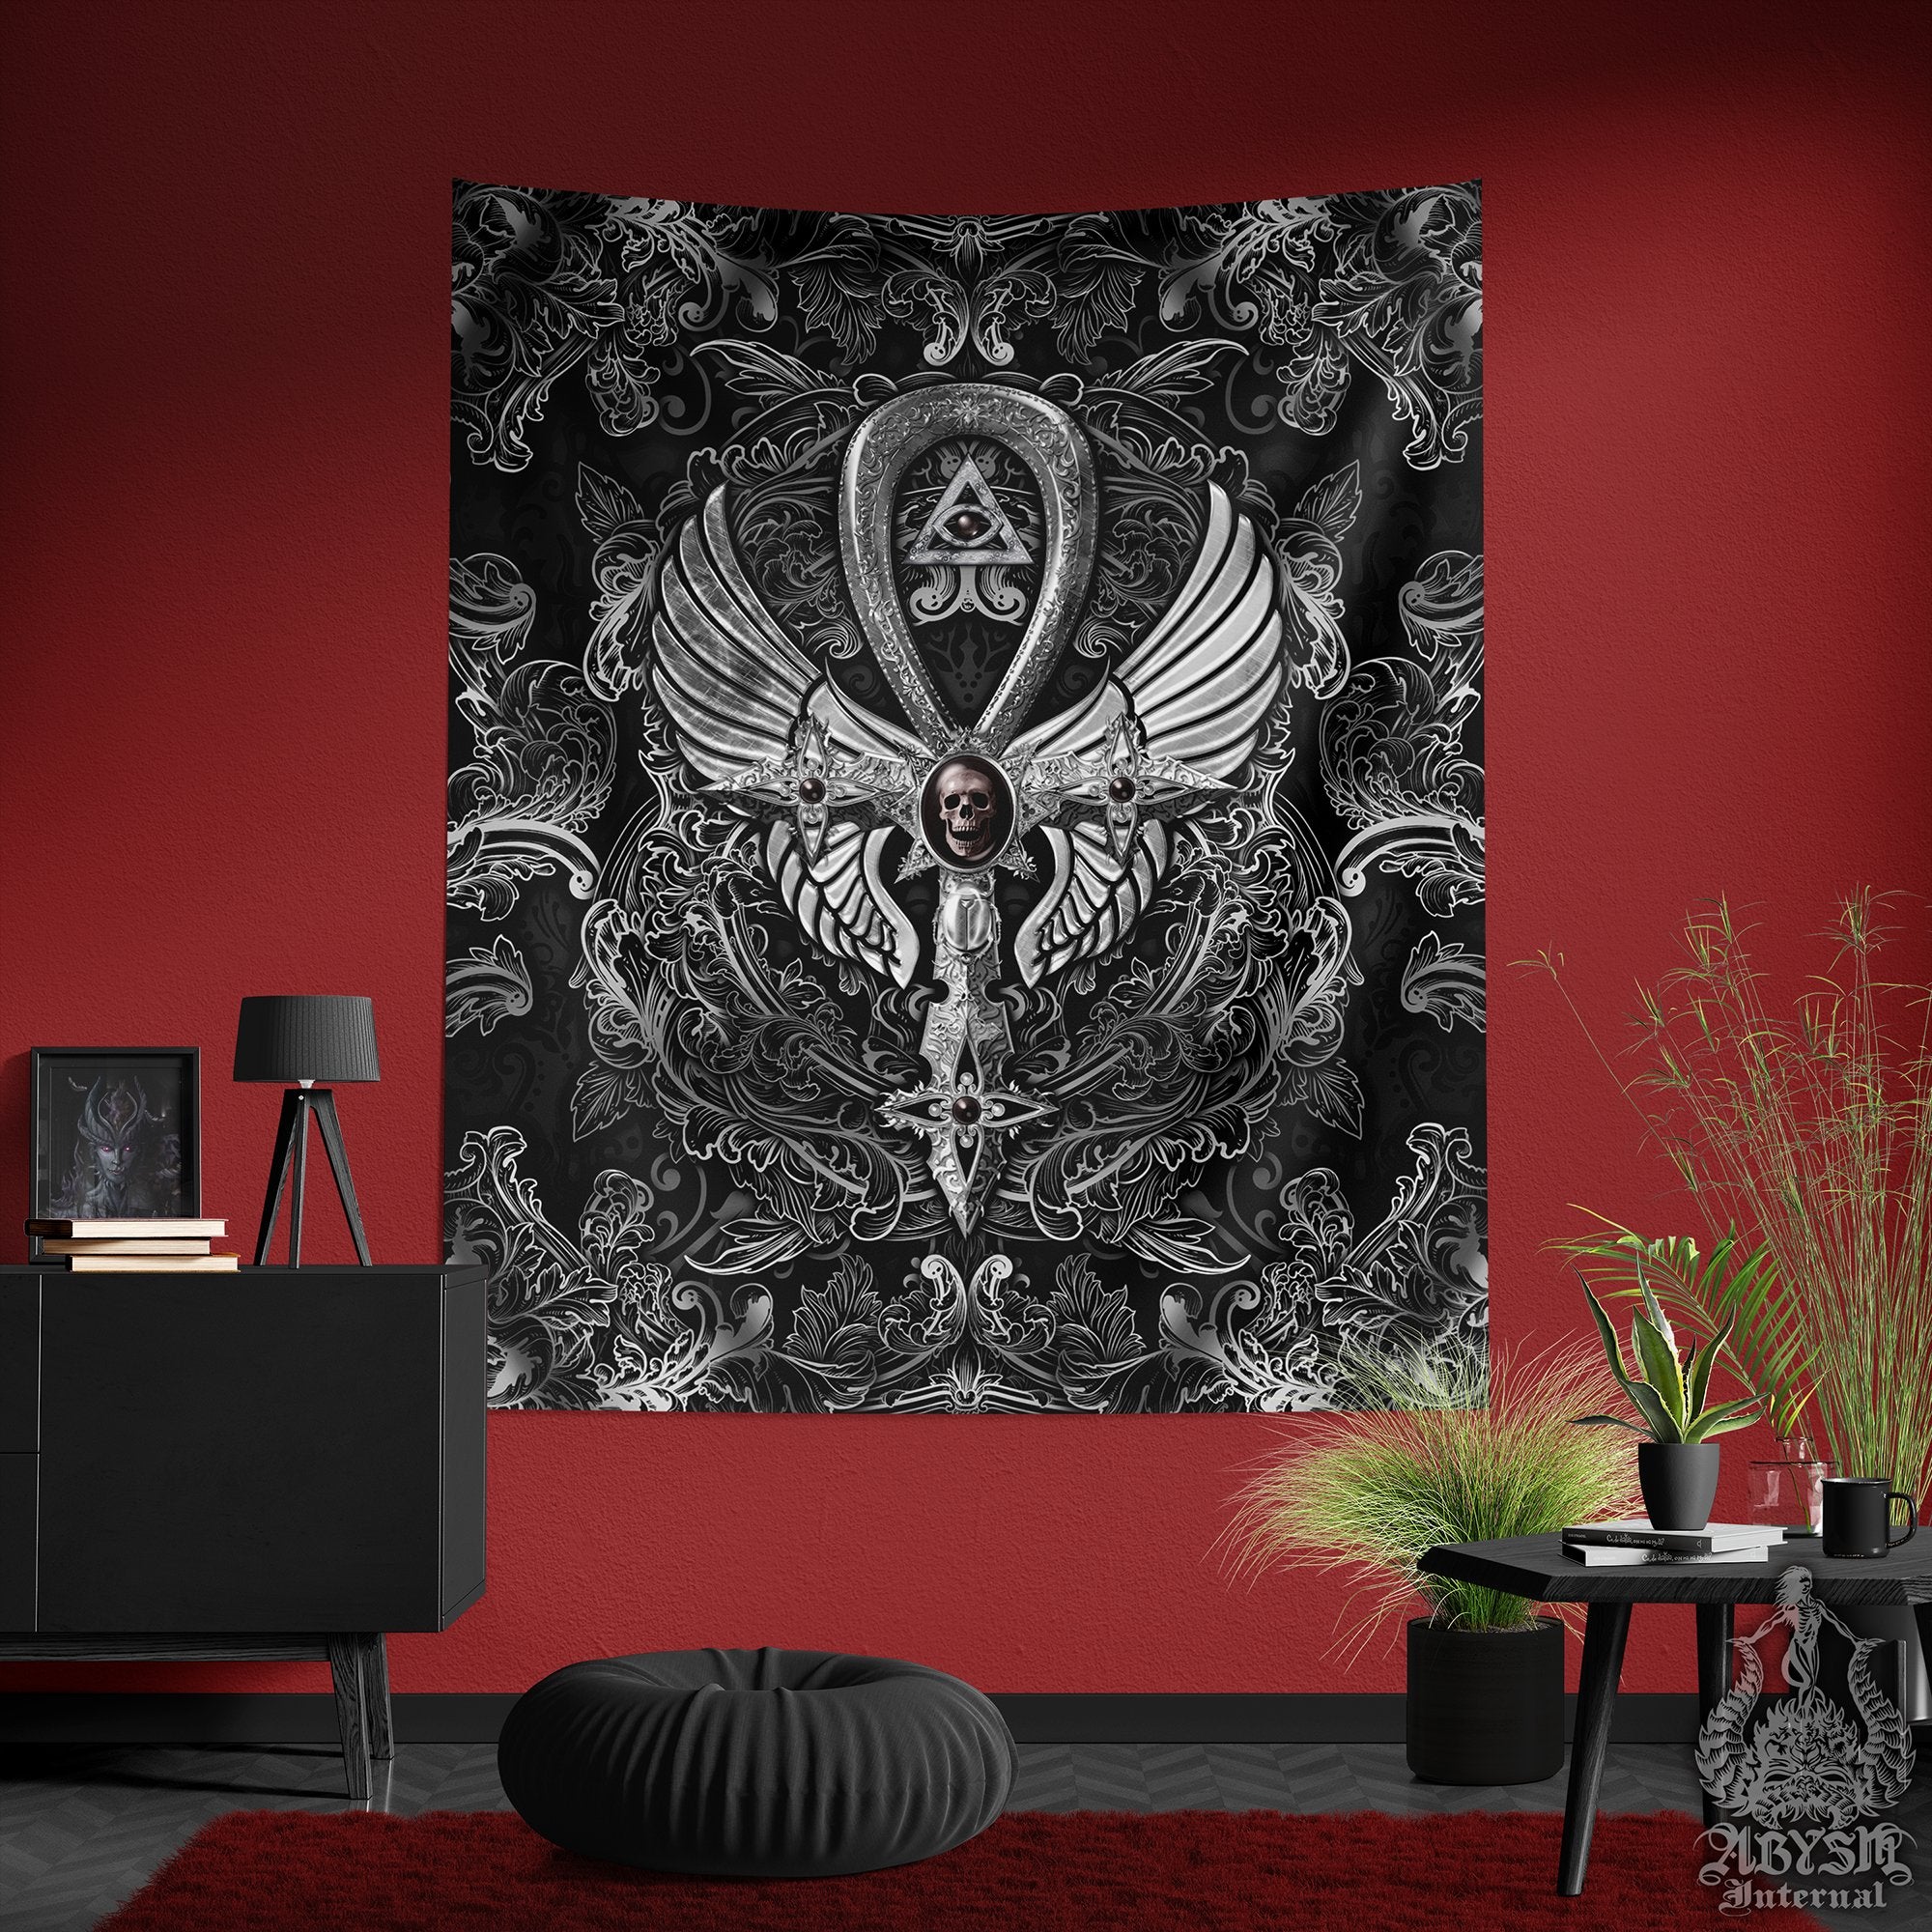 Gothic Ankh Tapestry, Goth Cross Wall Hanging, Occult Home Decor, Vertical Art Print - Dark Black, White, Gold, Red, 3 Colors - Abysm Internal